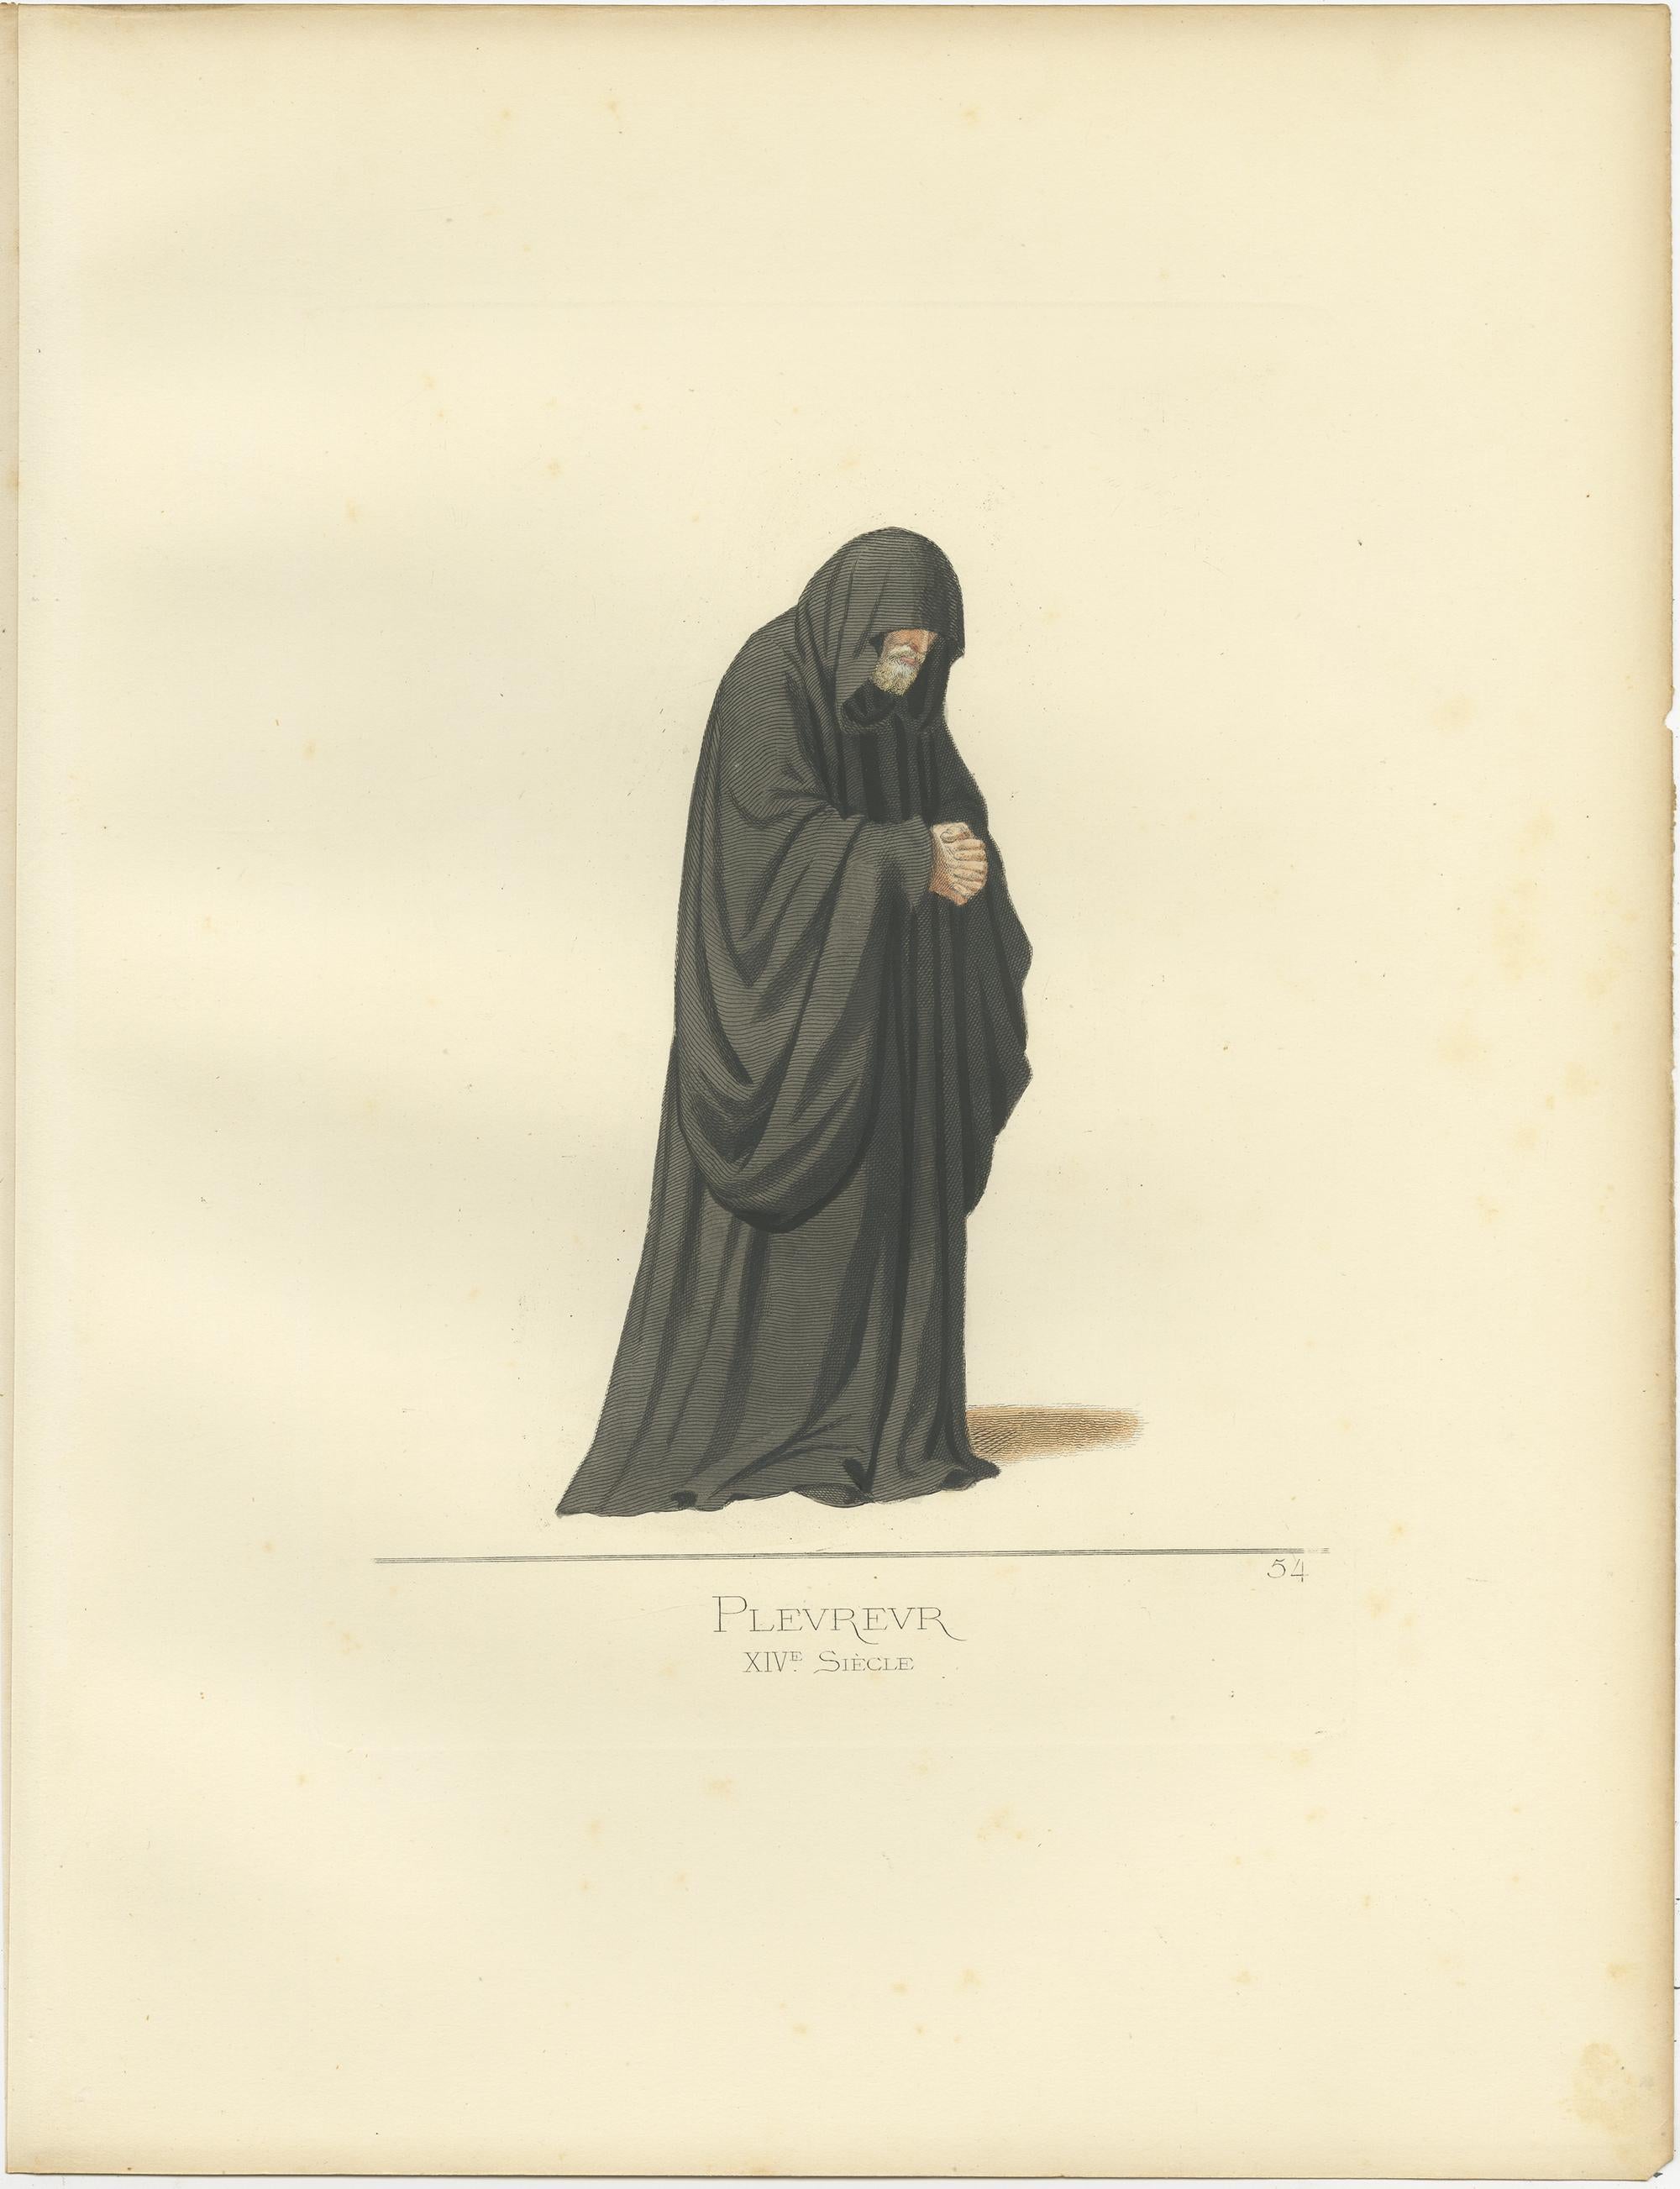 Antique print titled ‘Pleureur, XVe Siecle.’ Original antique print of a mourner. A mourner is someone who is attending a funeral or who is otherwise recognized as in a period of grief and mourning prescribed either by religious law or by popular